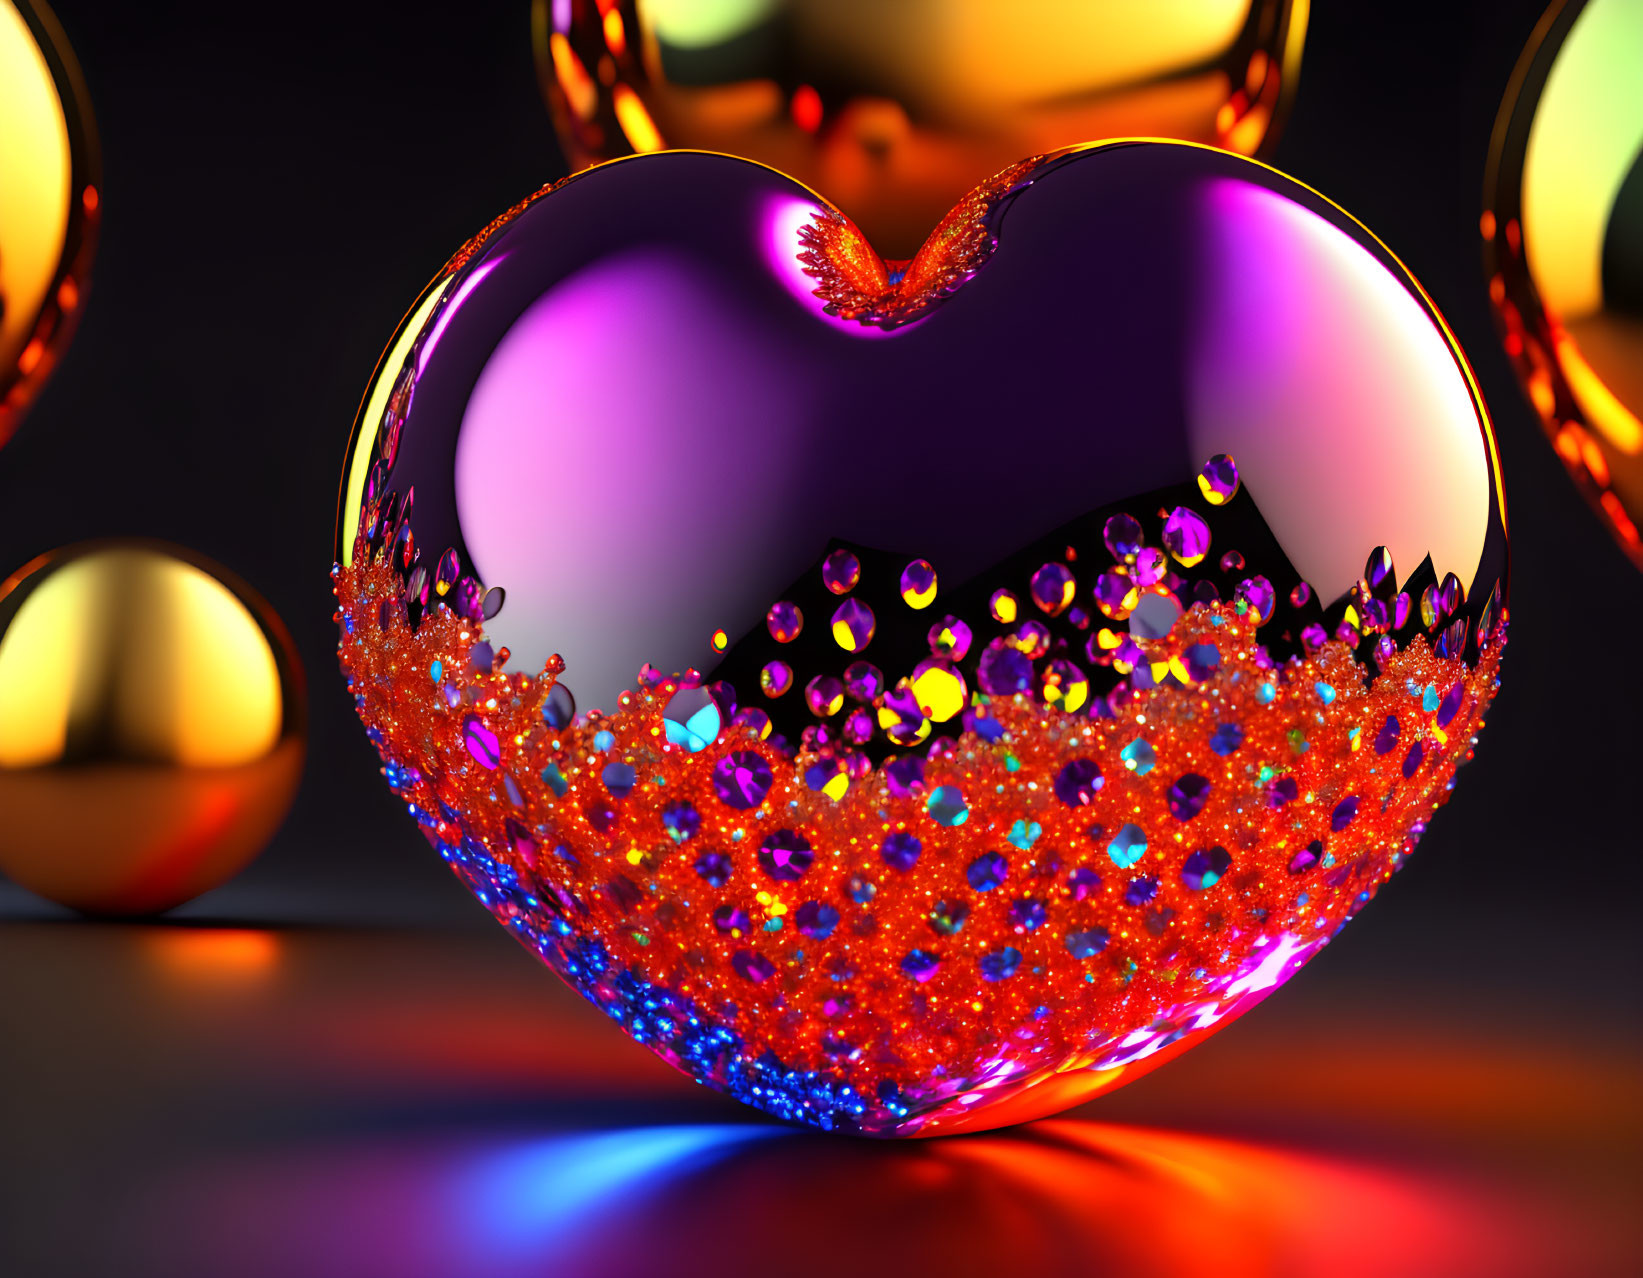 Shiny Heart-shaped 3D Rendering with Glittering Lower Half